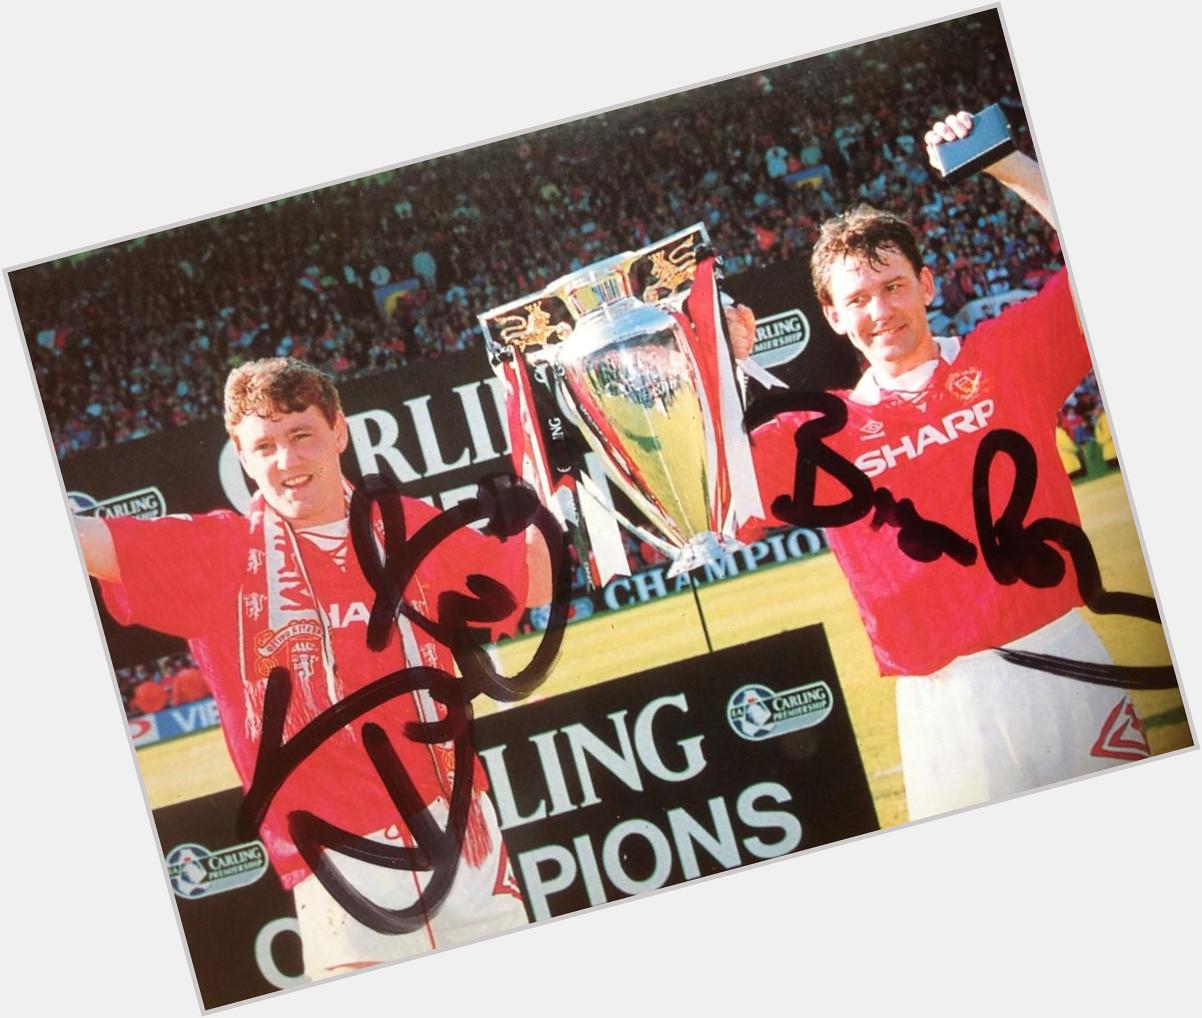  Happy Birthday BRYAN ROBSON,11-1-57 played 461games for UNITED between 1981/94(Captain Marvel)LEGEND 